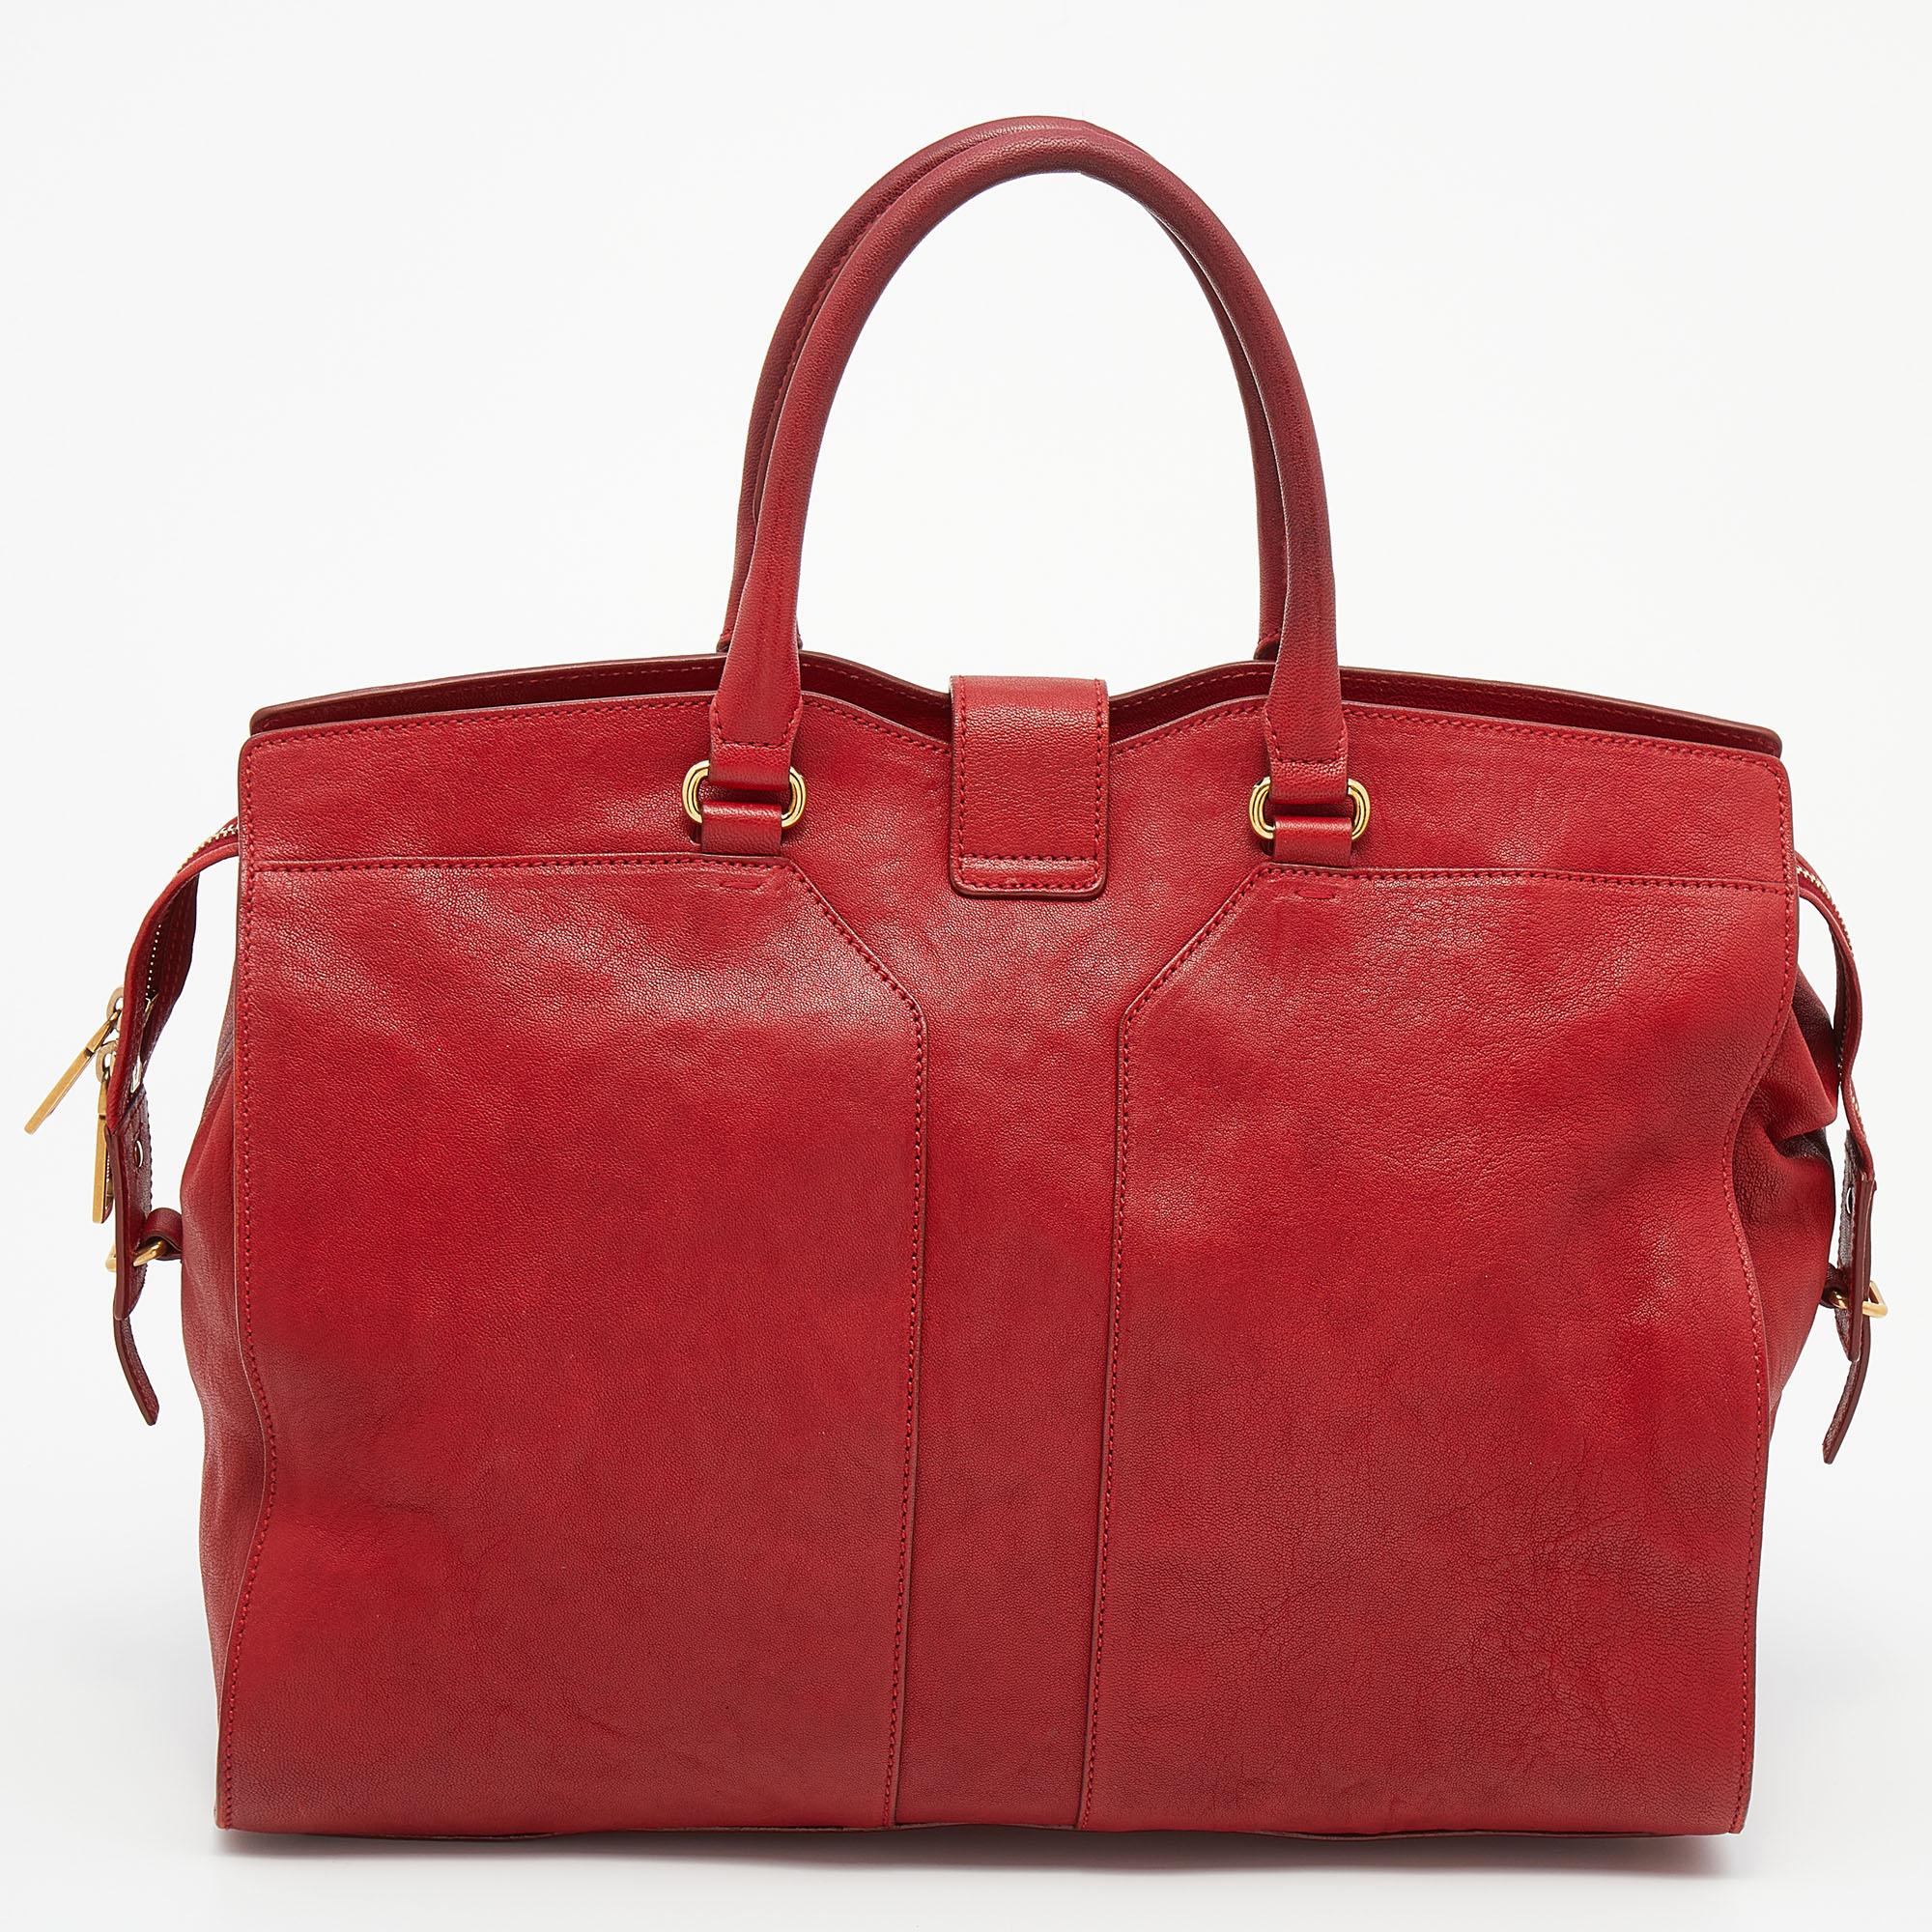 This elegant red Cabas Chyc tote from Yves Saint Laurent is ideal for everyday use. Crafted from leather, the bag is detailed with a gold tone hardware Y motif snap closure and dual-rolled handles. The top zip closure opens to a spacious interior